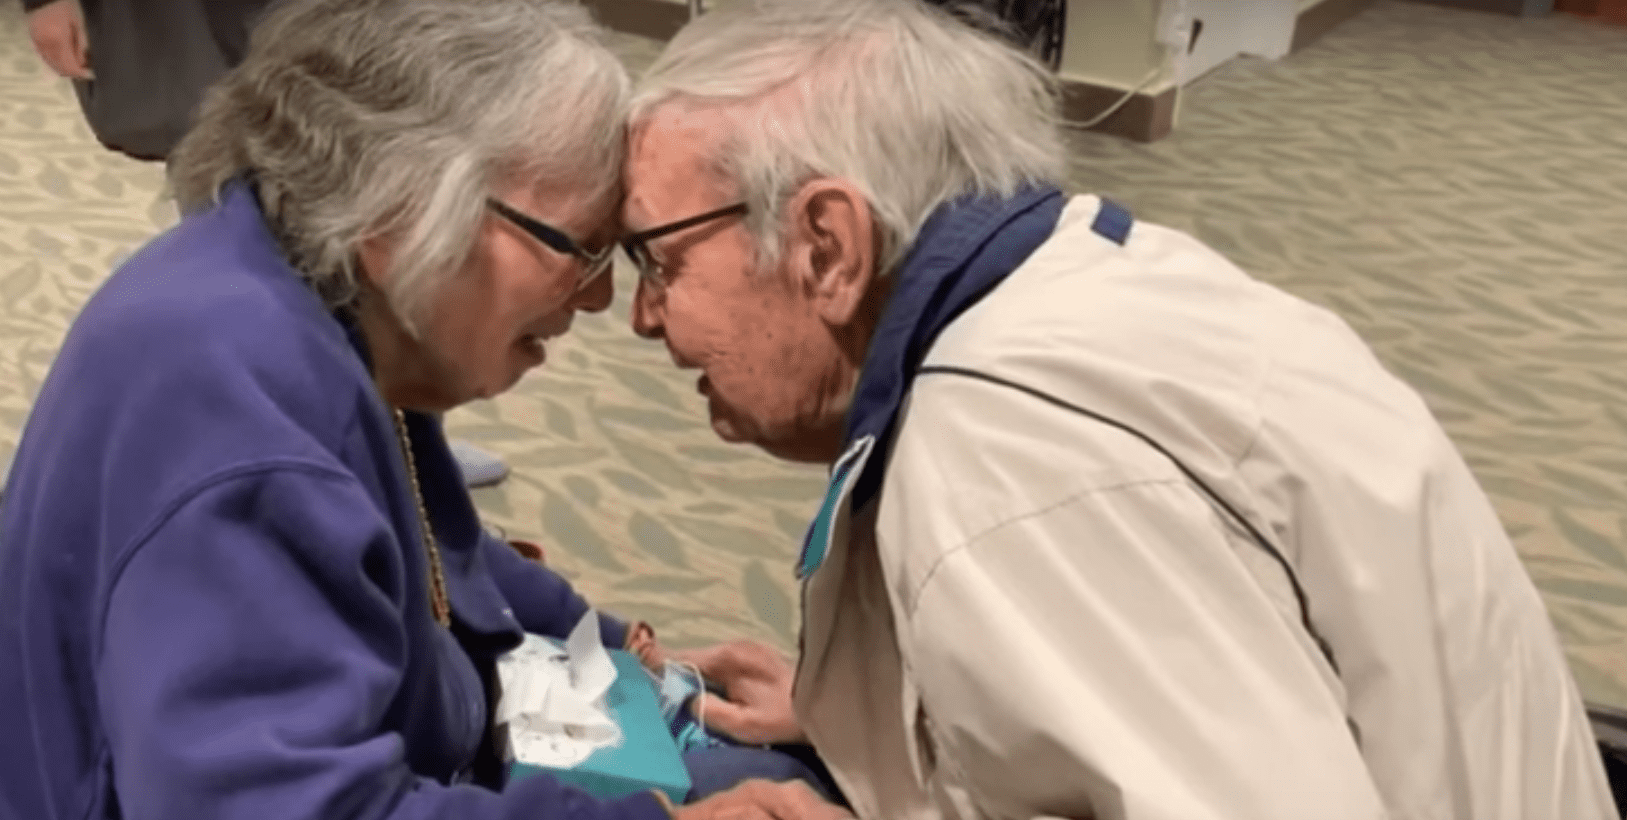 Jean and Walter Willard getting emotional after reuniting. | Source: Youtube.com/CBS News